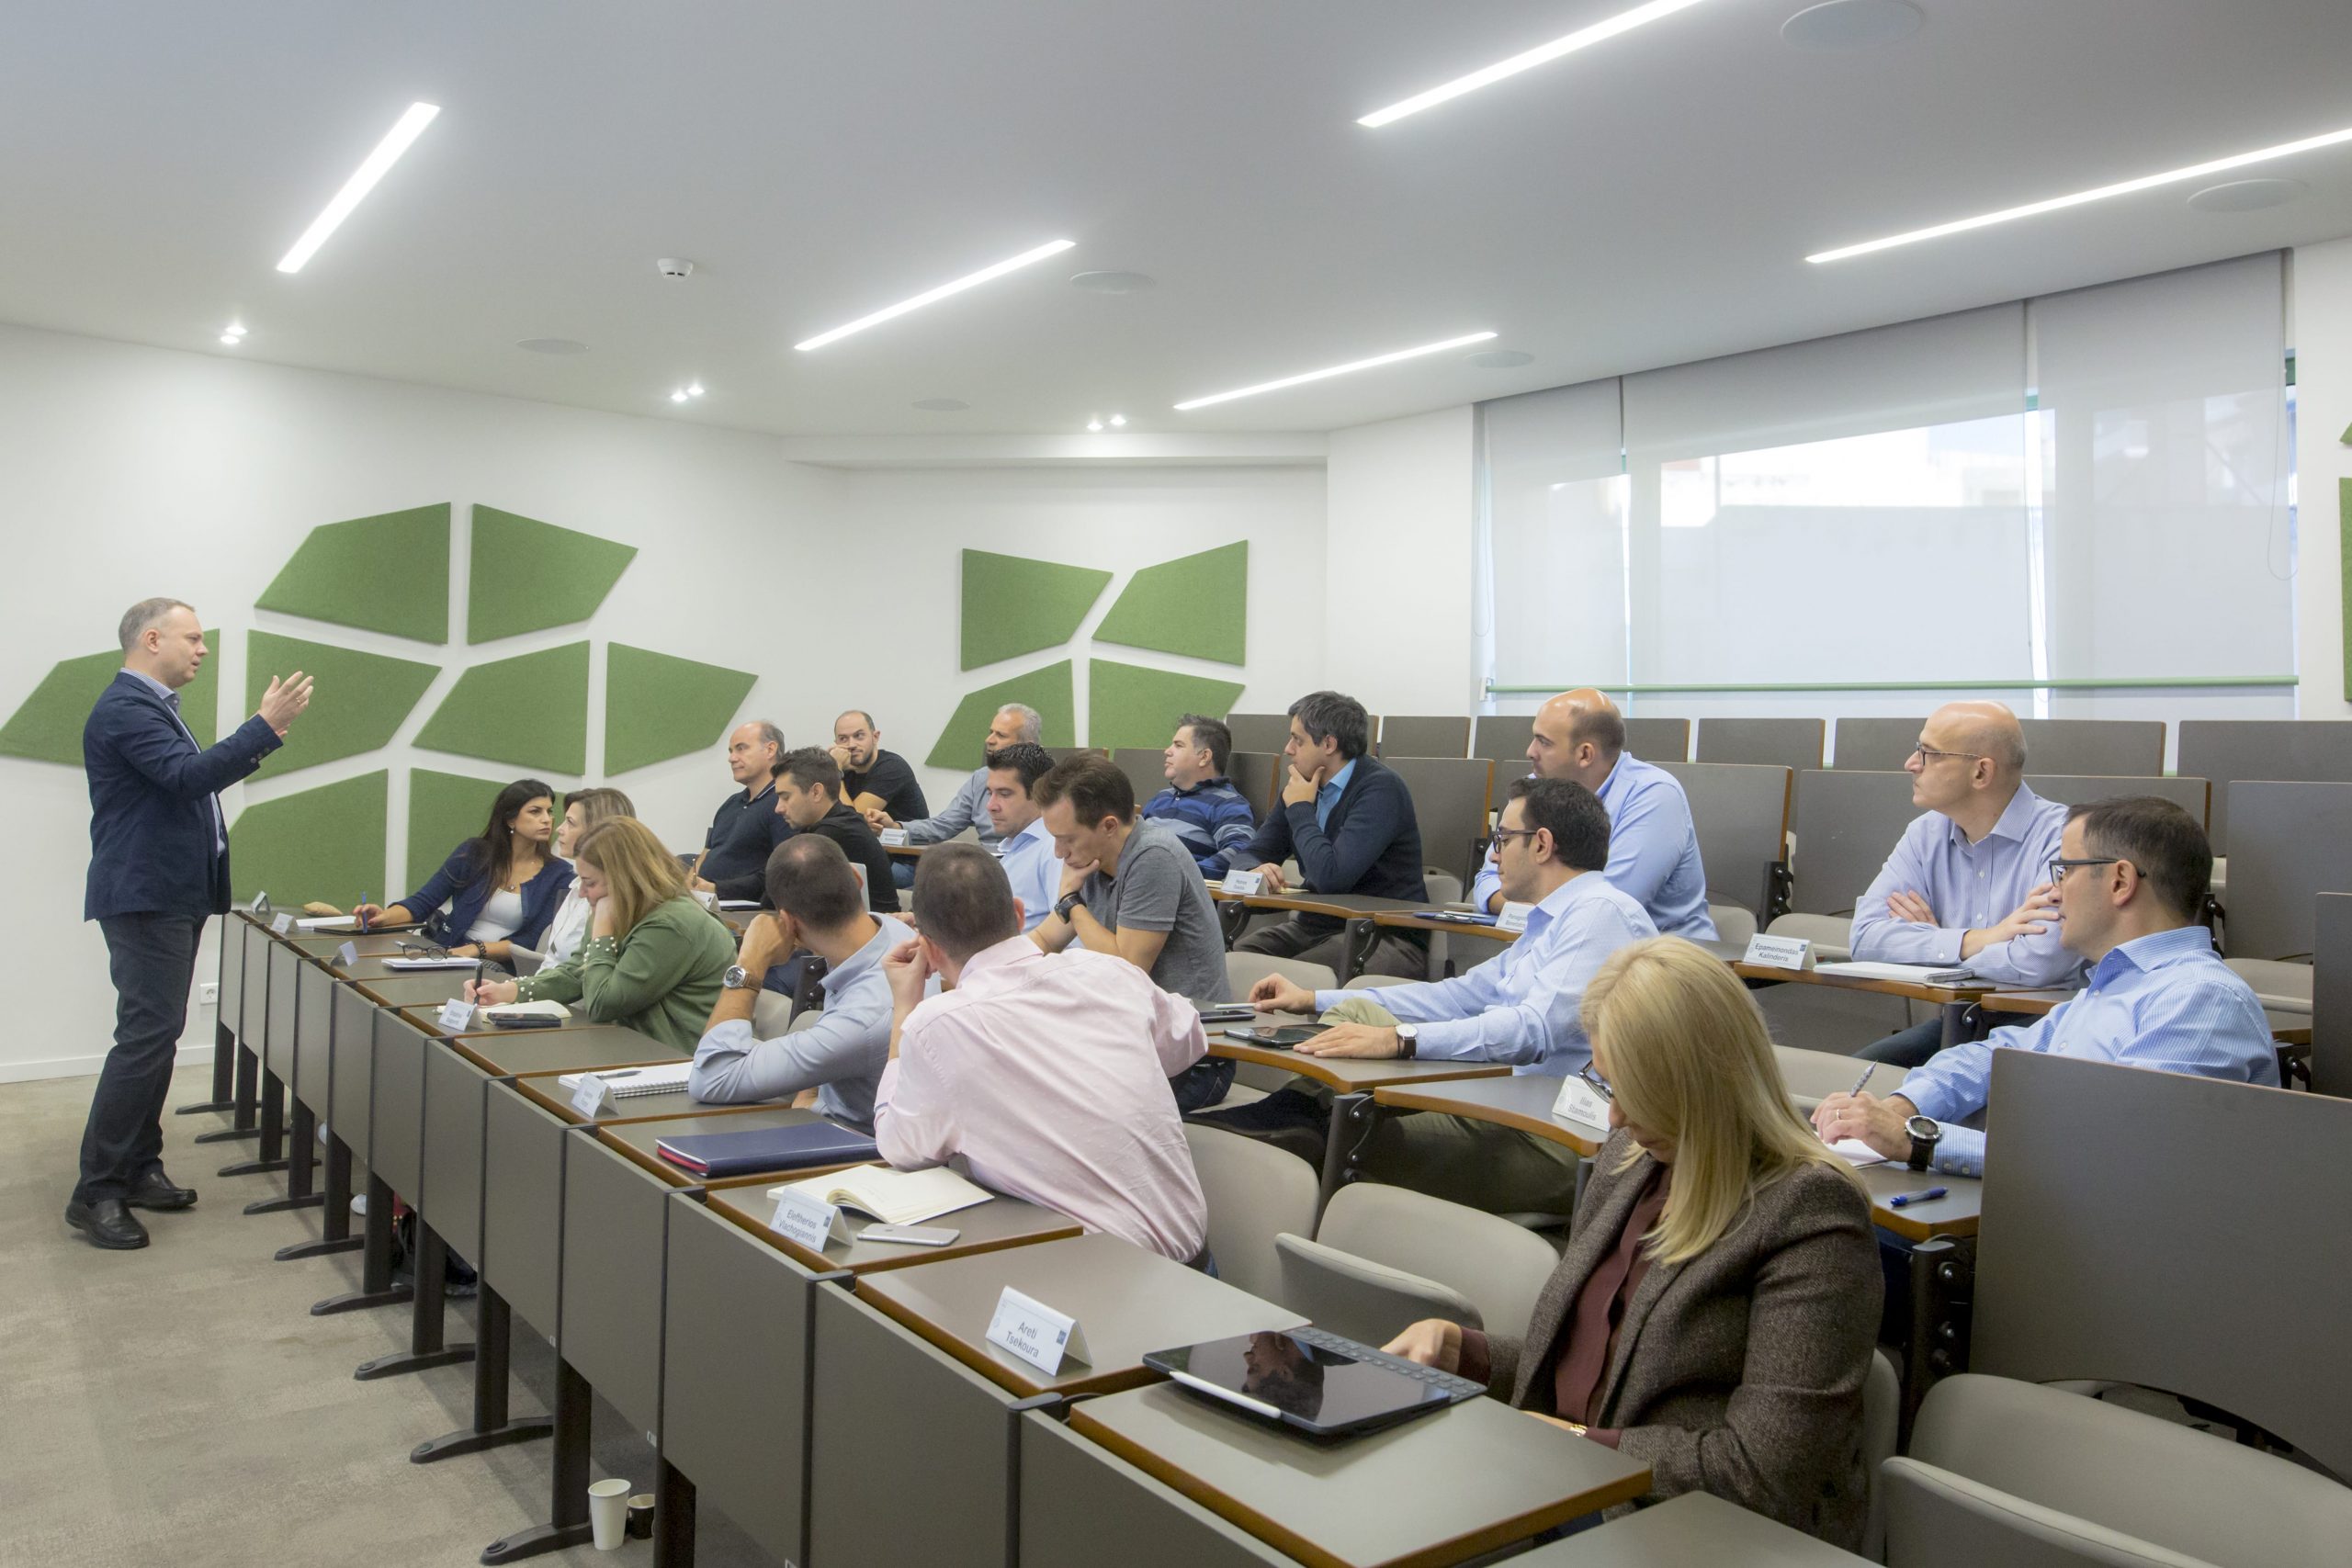 Alba Executive MBA: Today’s leaders acquire the skills to face tomorrow